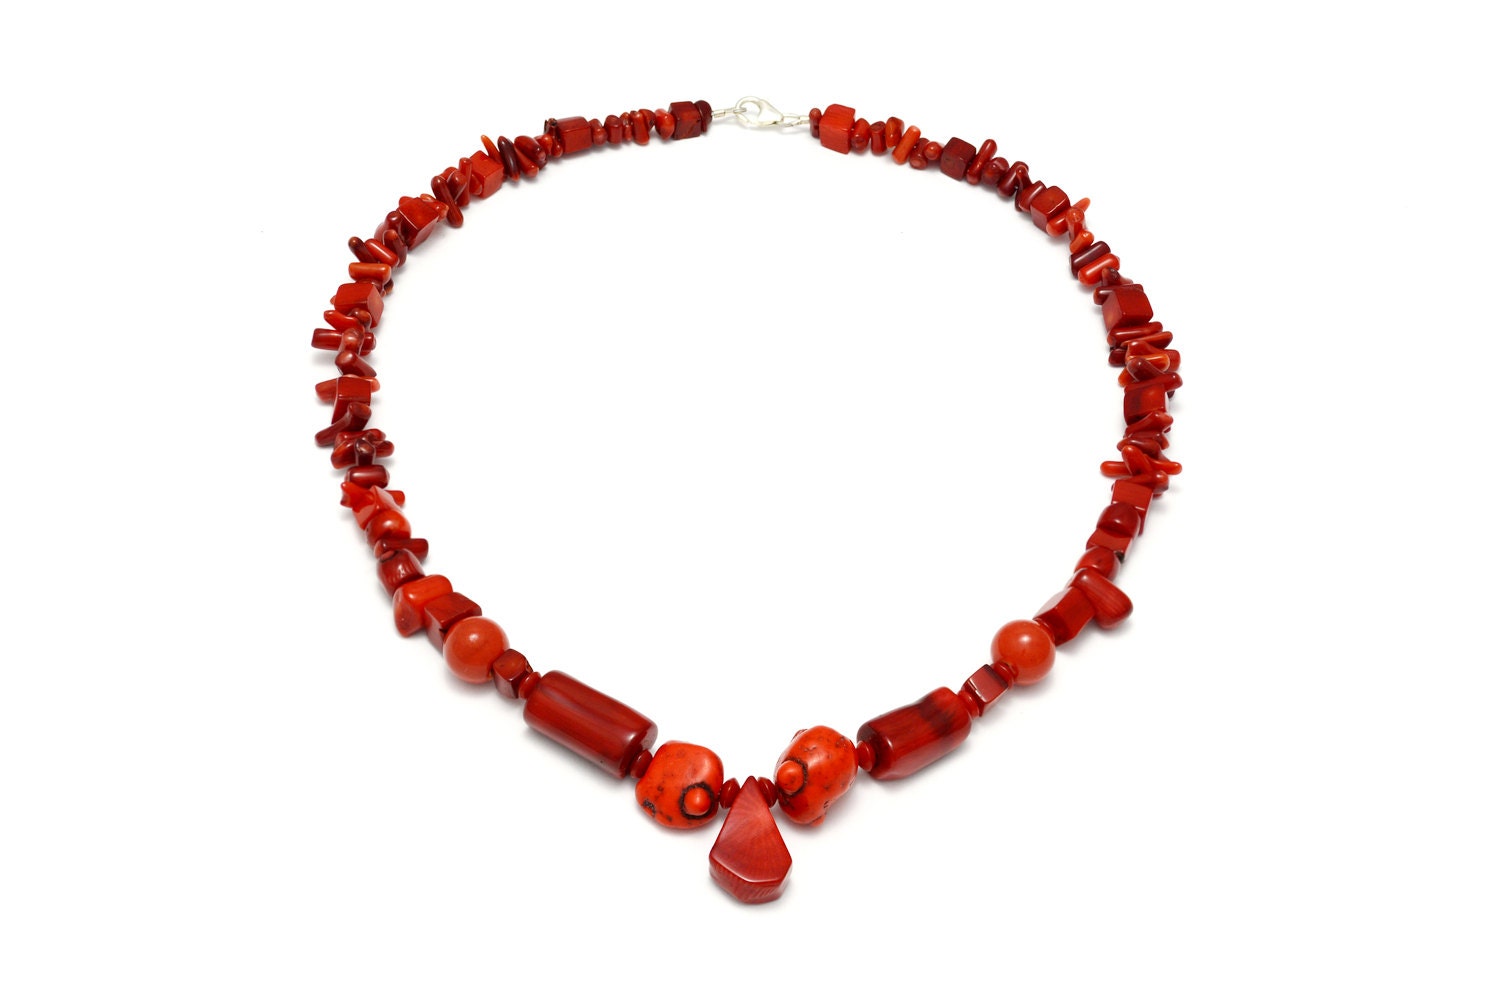 Red bamboo coral necklace by StoneVamp on Etsy